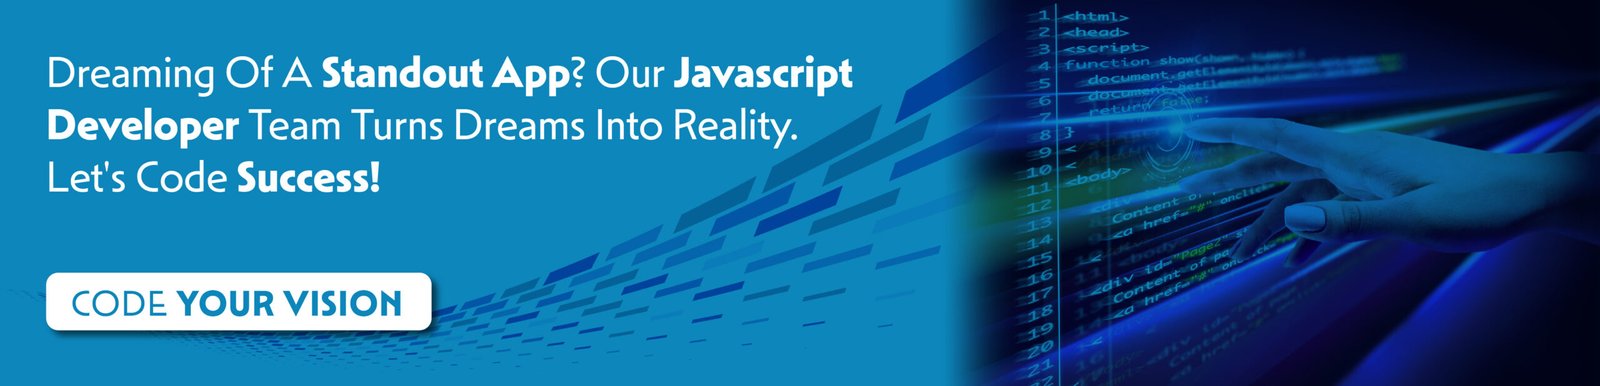 Code Your Vision with JavaScript 